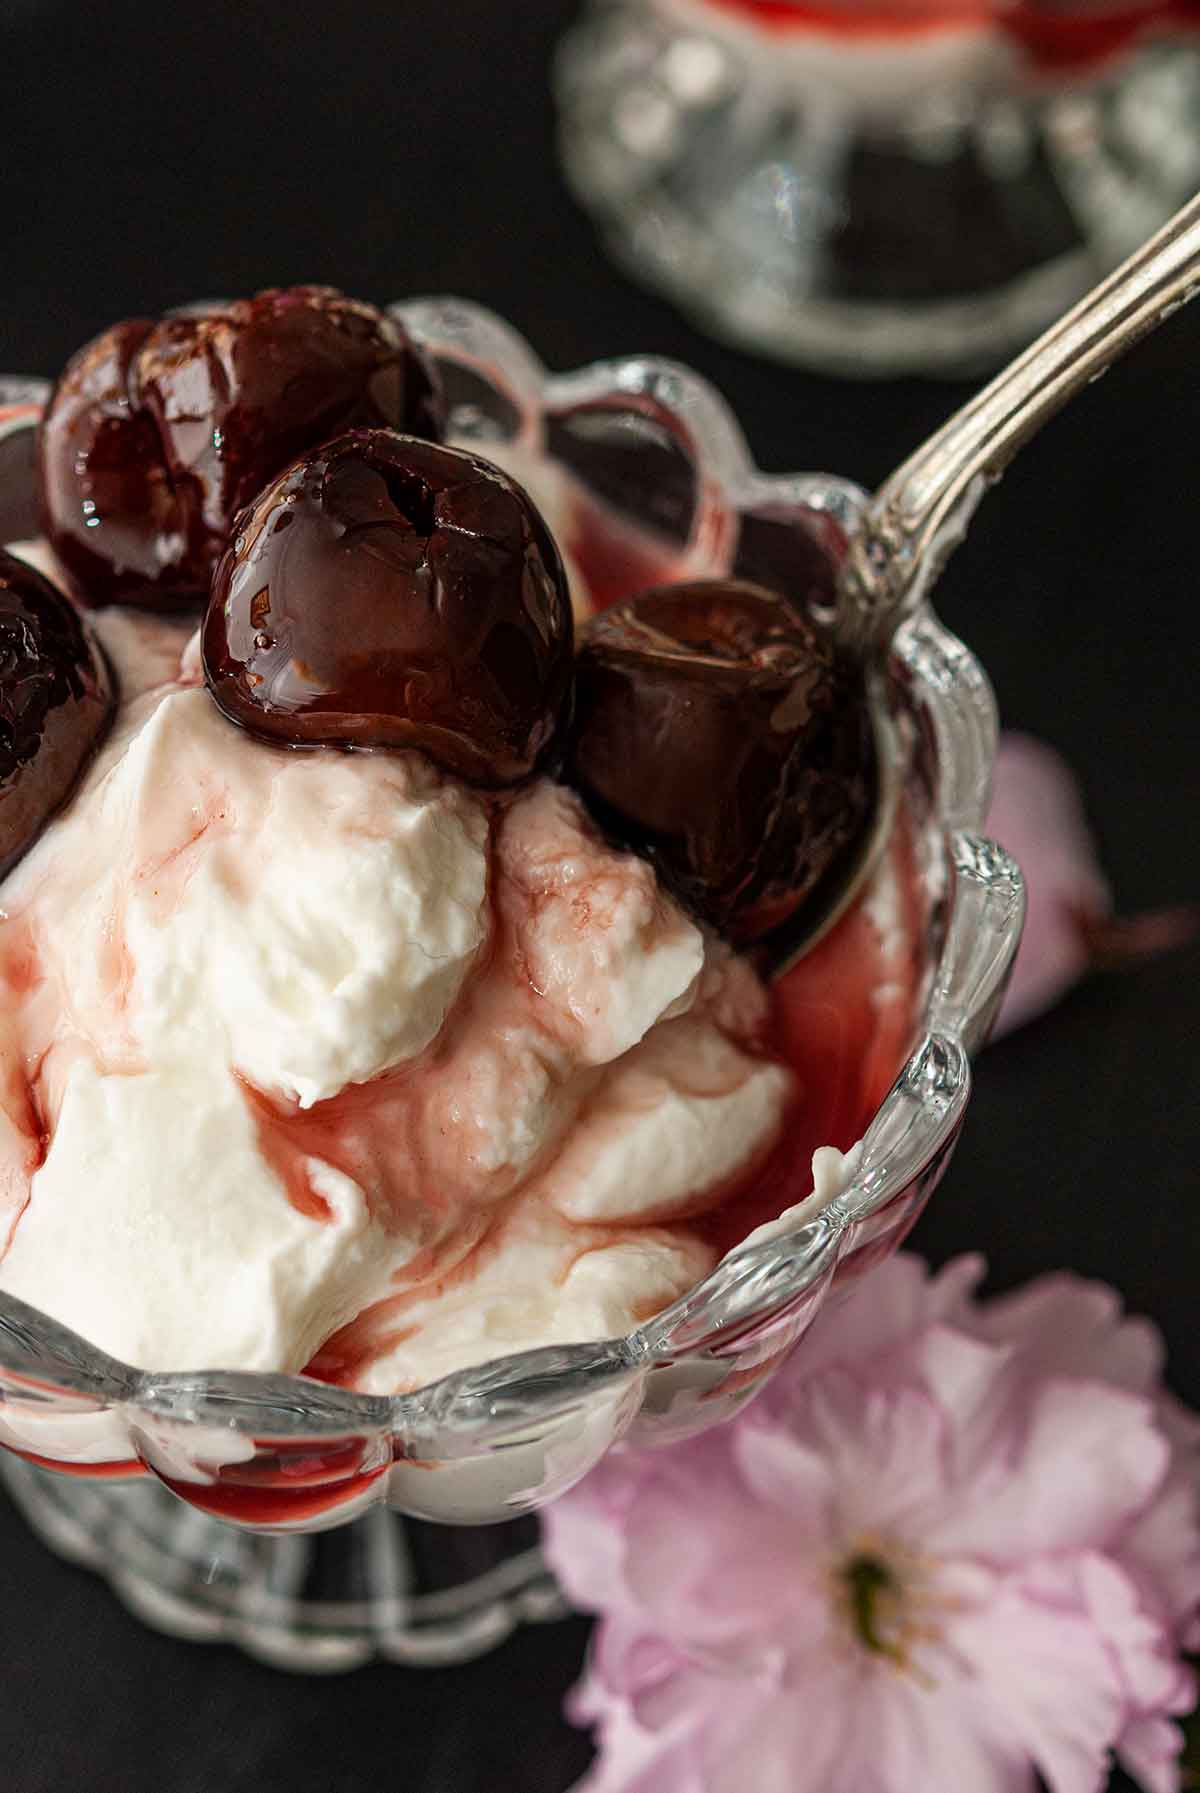 A spoon in a bowl of cherries and yogurt in a glass bowl.